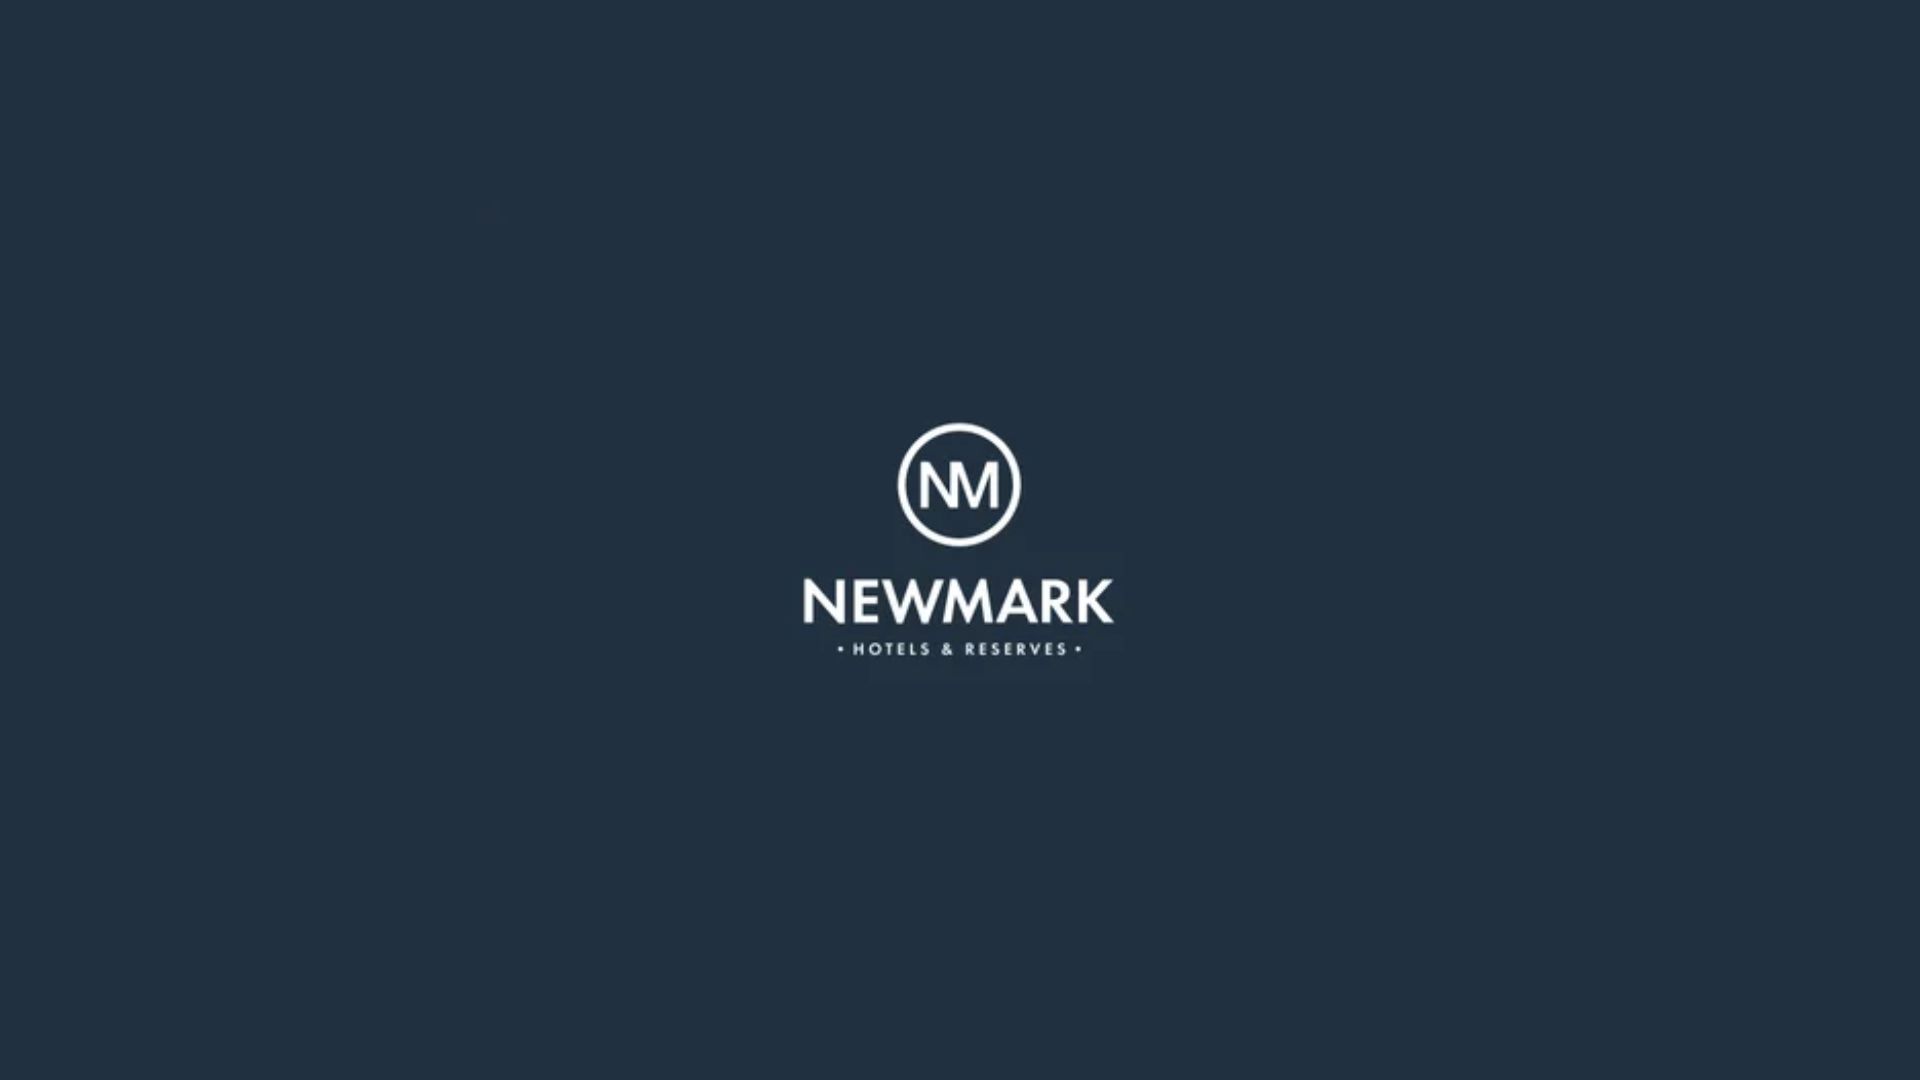 Newmark appoints 3 new director